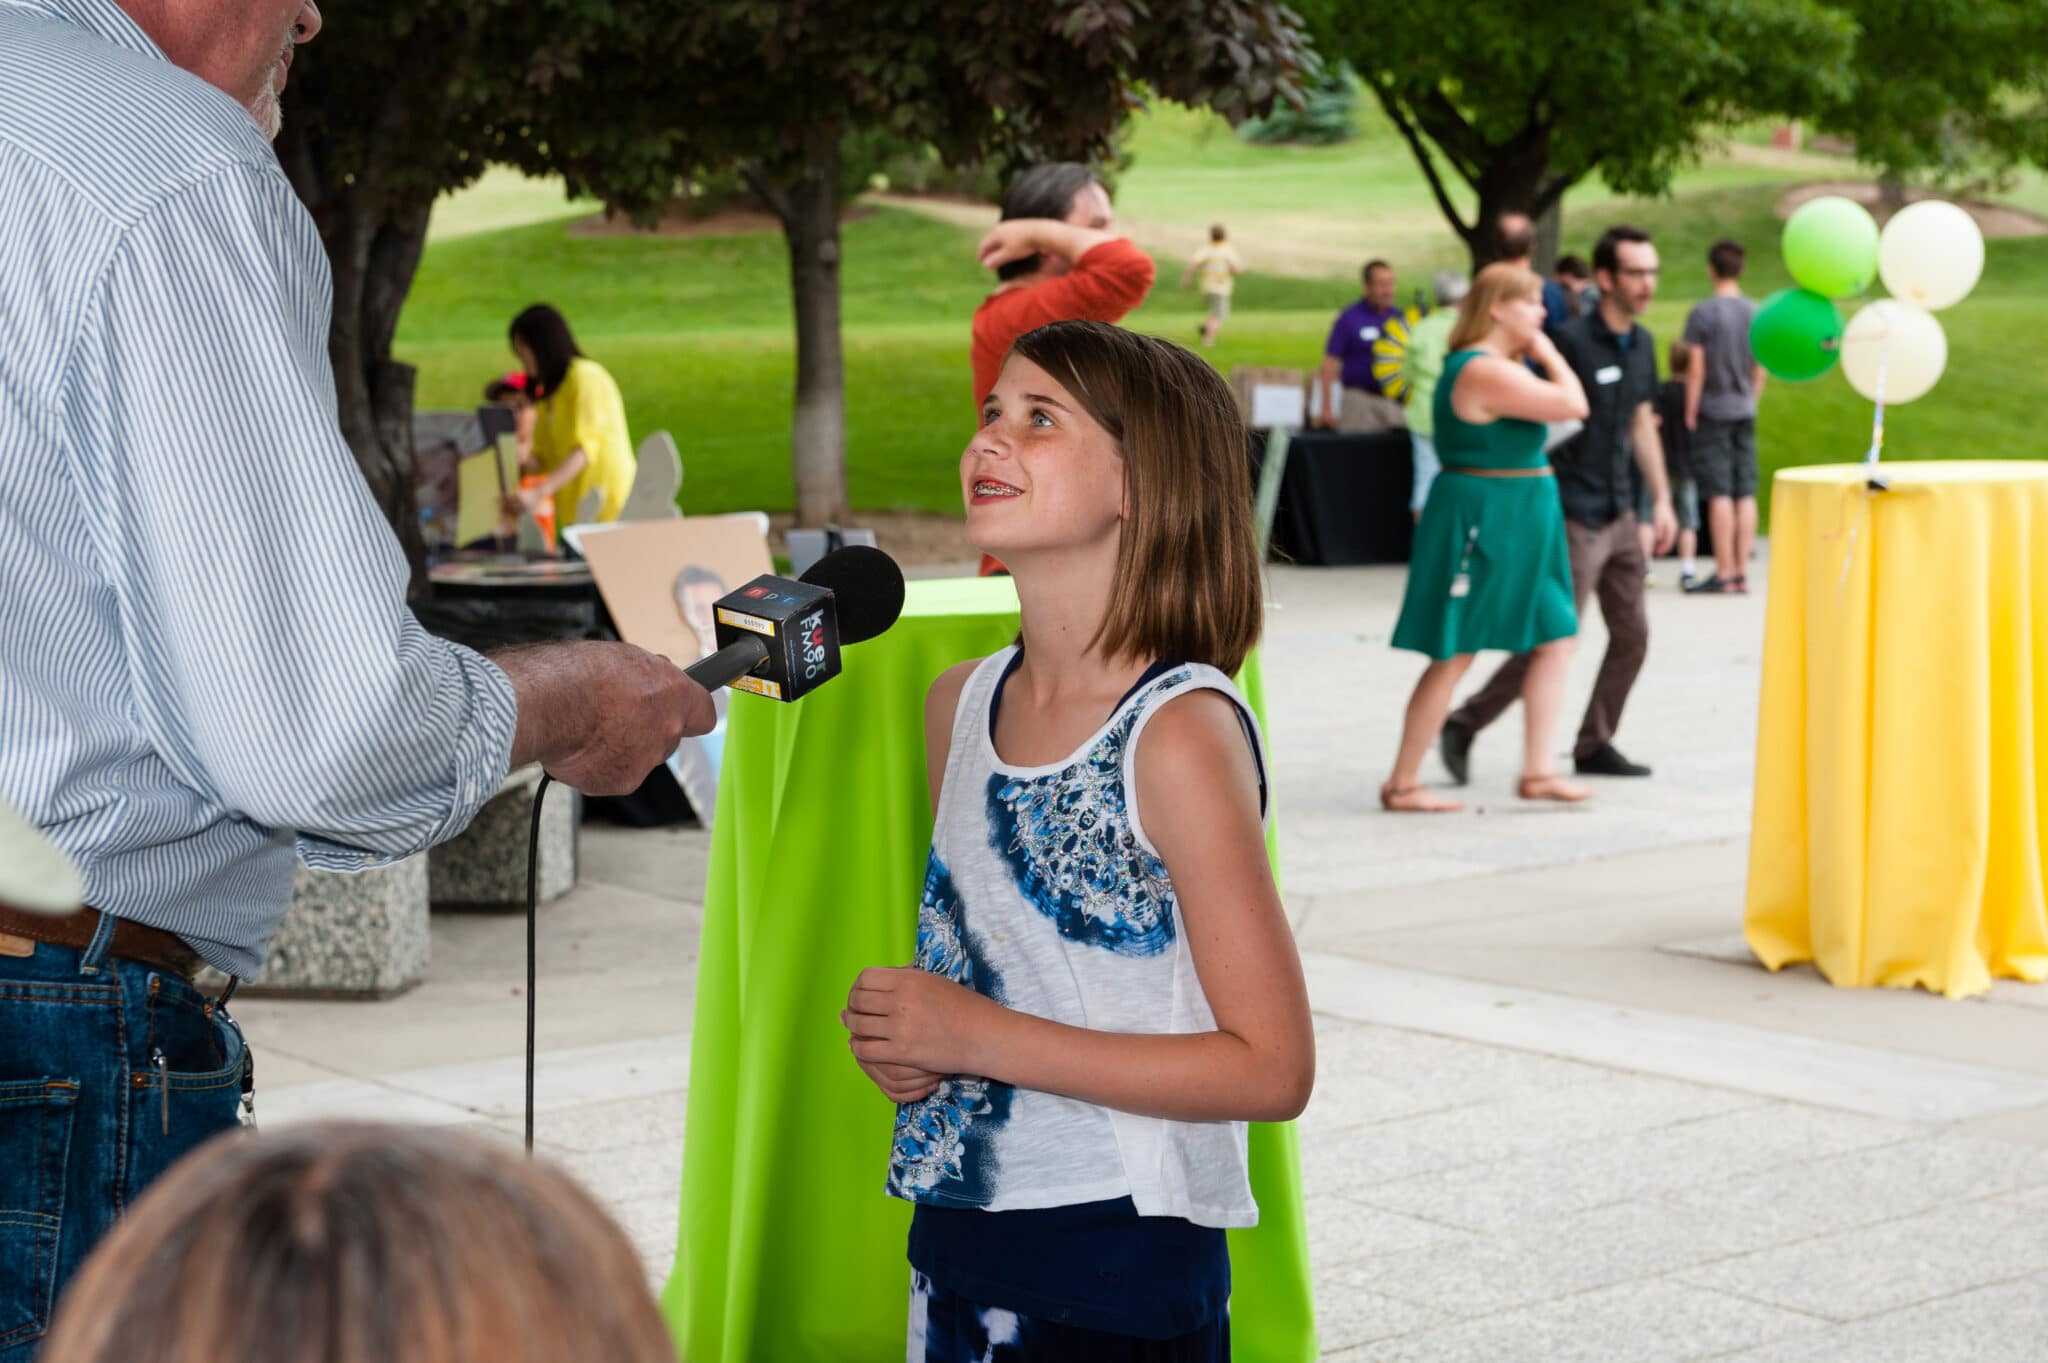 A young girl speaks into a microphone and talks about why she likes public radio at the KUER summer event.